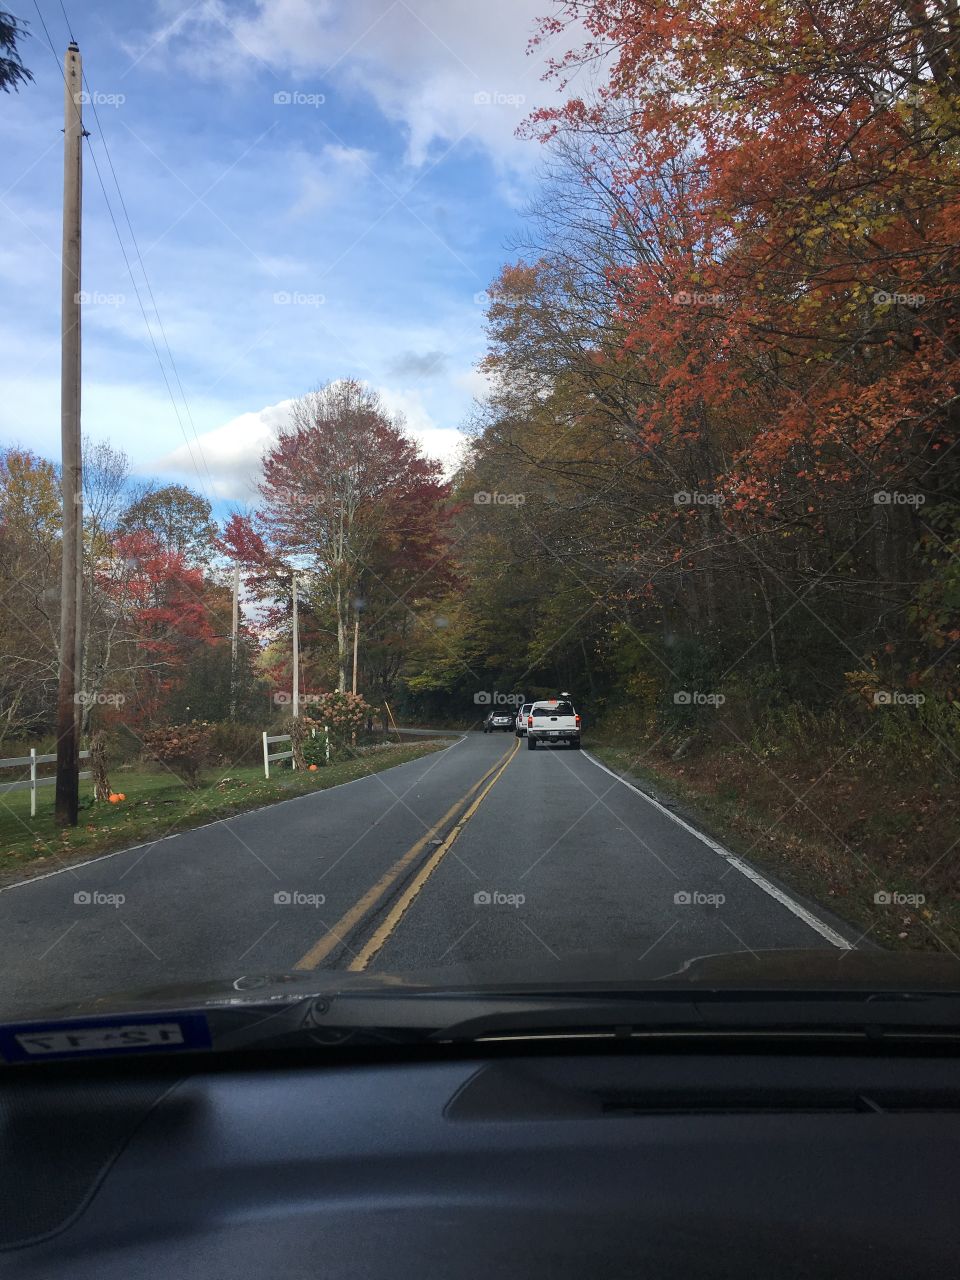 Driving down the road in the fall with colorful foliage